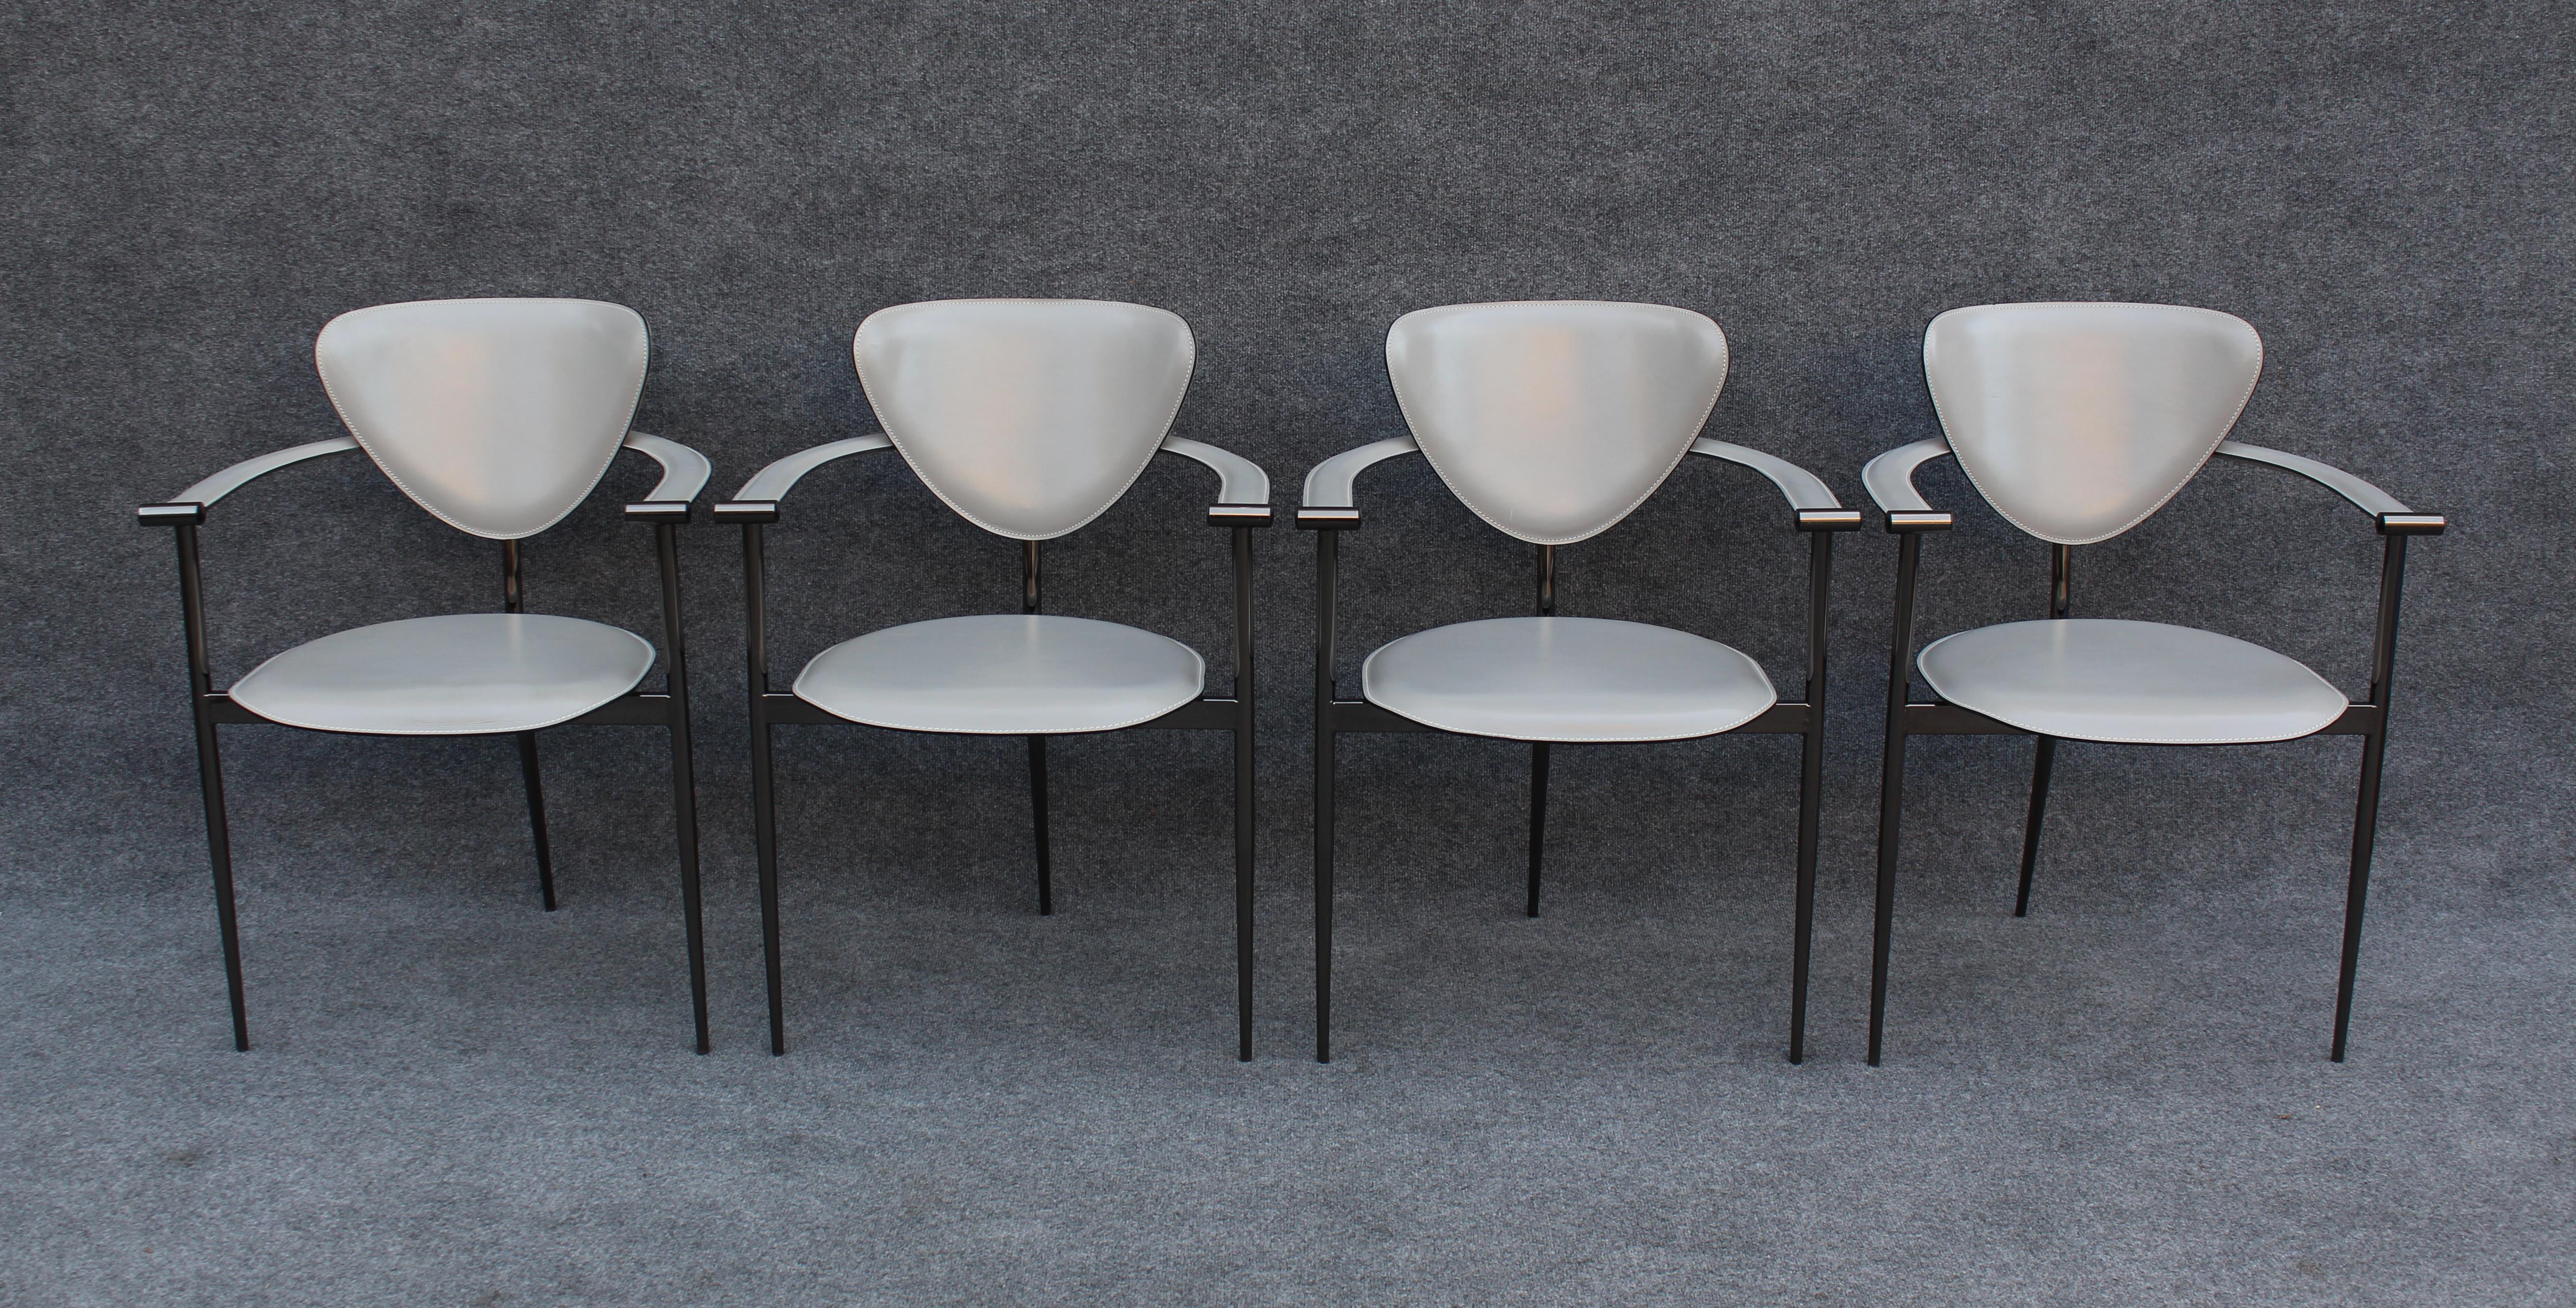 Designed in the 1980s in Italy, these chairs were amde by Arrben, a small but prestigious design and manufacturing comany. Over the years, the 'Marilyn' chair evolved to eventually culminate in this gray and black set. Most Marilyn chairs featured